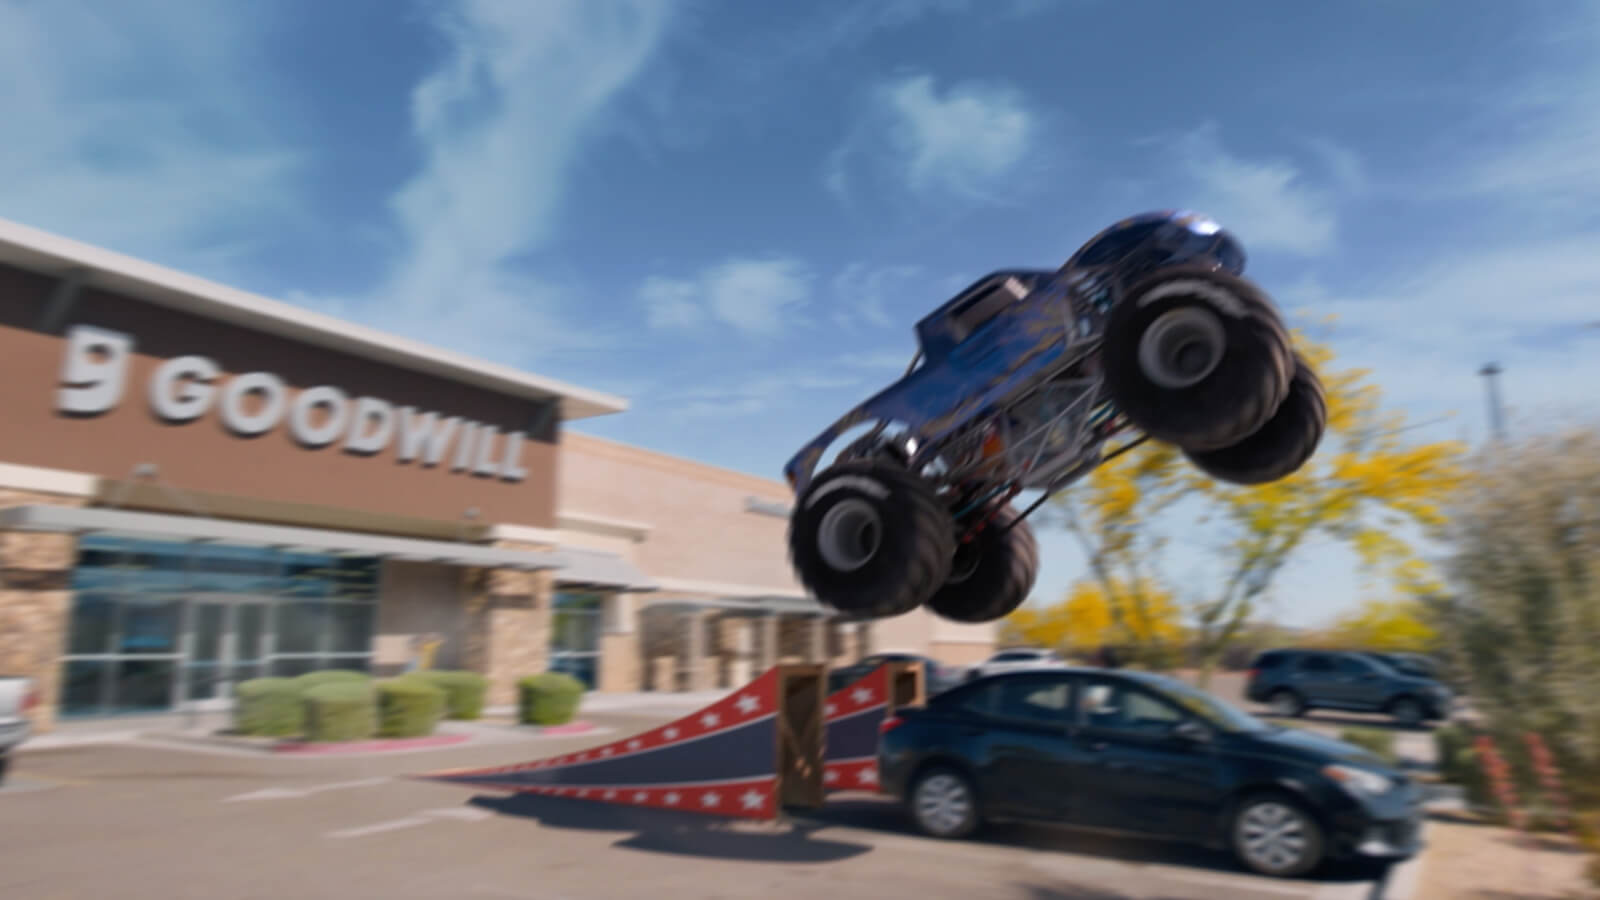 Image of Goodwill Monster Truck commercial